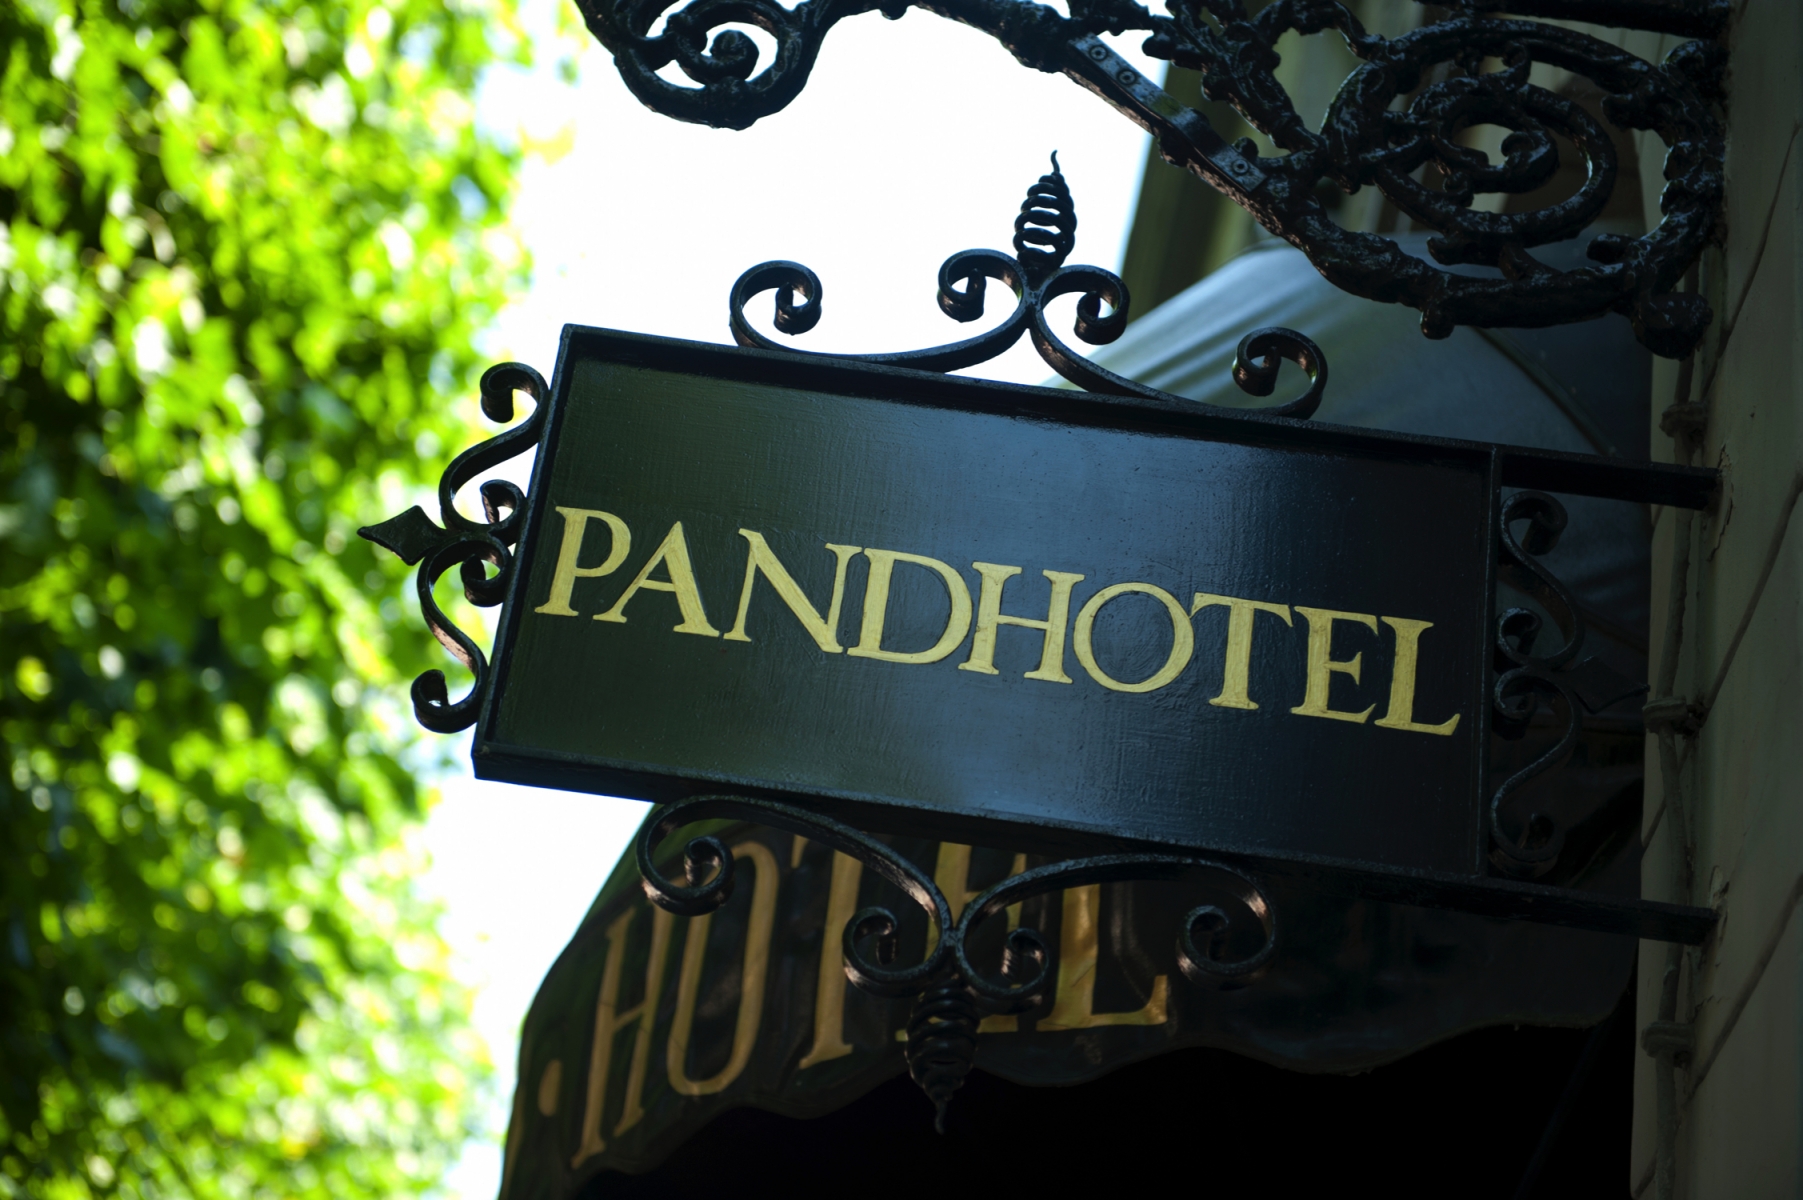 The Pand Hotel <br/>440.00 ew <br/> <a href='http://vakantieoplossing.nl/outpage/?id=9ab873310ad270284bf7db8b639dbe10' target='_blank'>View Details</a>